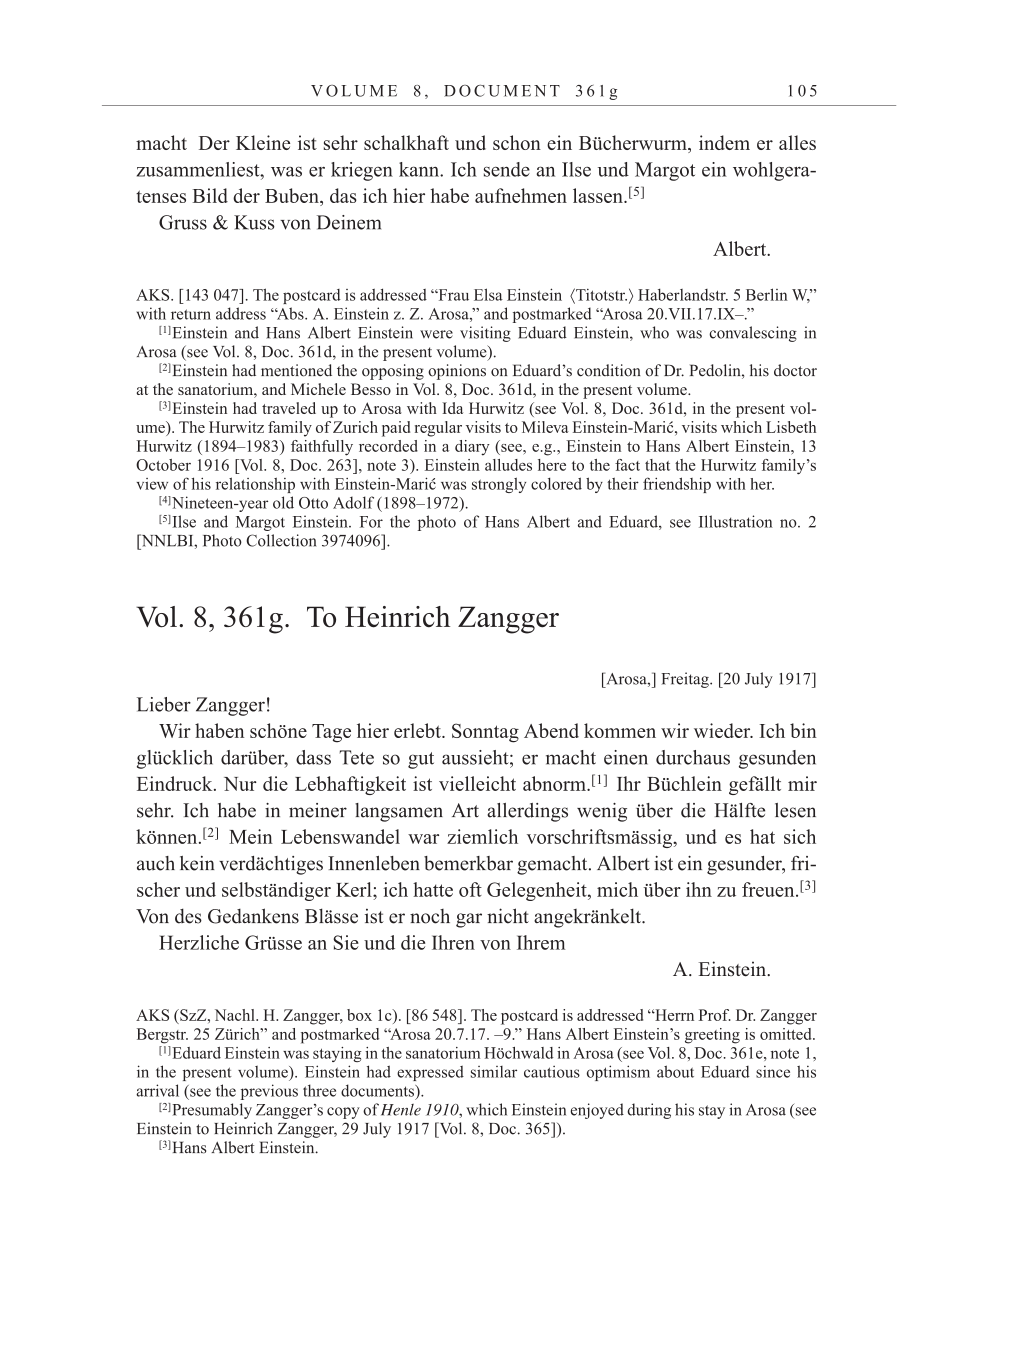 Volume 10: The Berlin Years: Correspondence May-December 1920 / Supplementary Correspondence 1909-1920 page 105